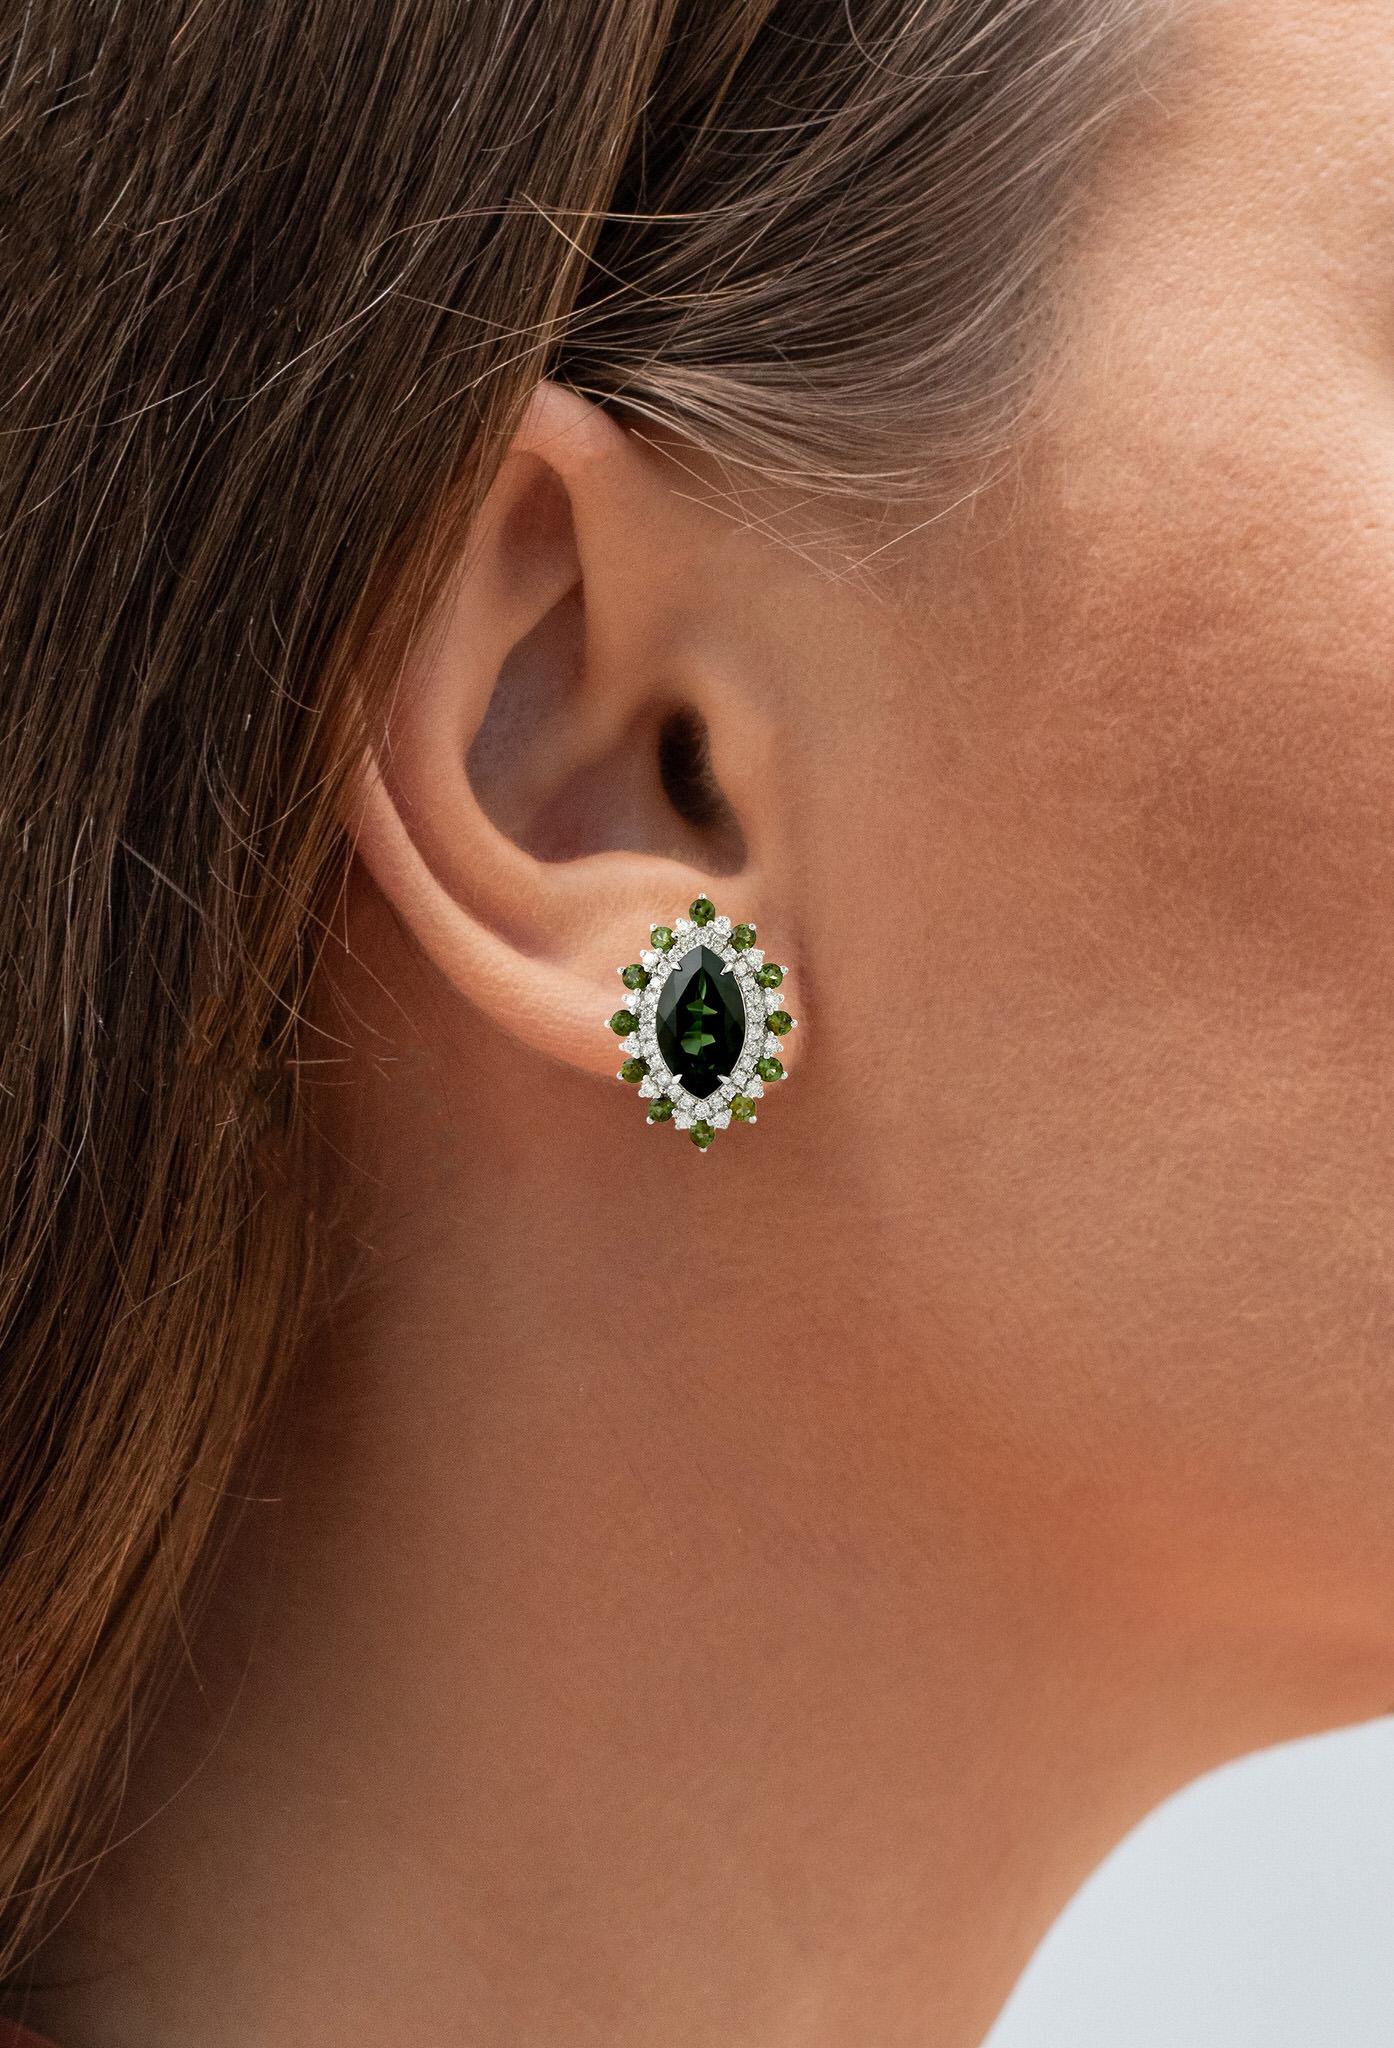 It comes with the appraisal by GIA GG/AJP
All Gemstones are Natural
Green Tourmalines = 6.03 Carats
Diamonds = 0.65 Carats
Cut: Mixed Cut
Earrings Dimensions: 20 x 15 mm
Metal: 18K Gold